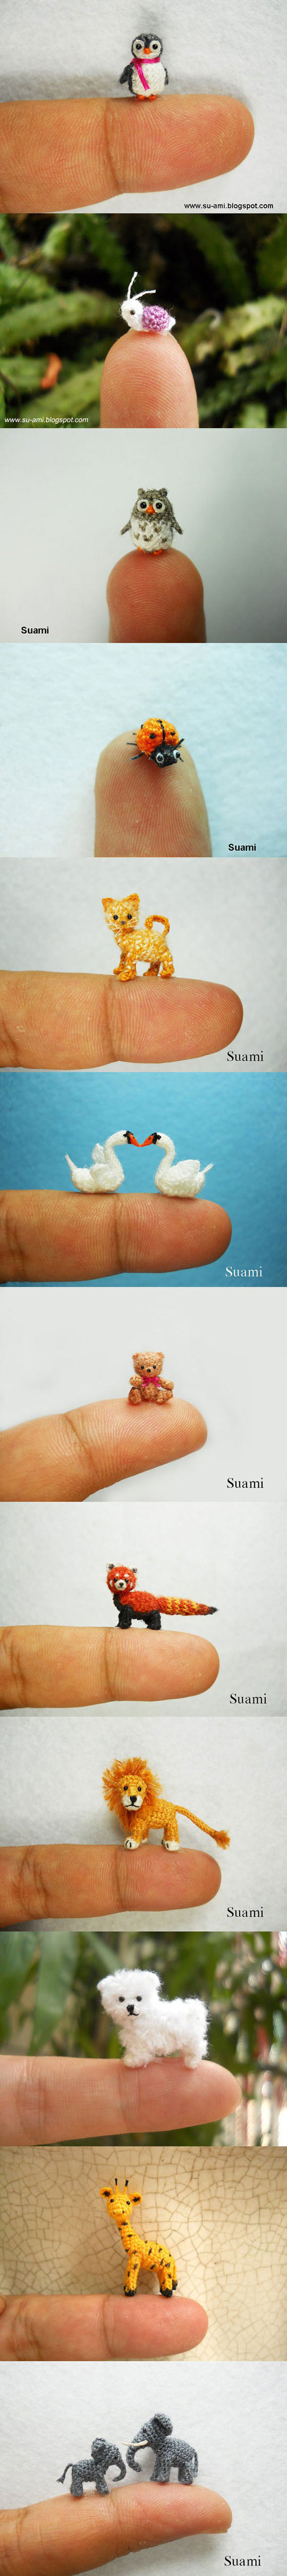 The Tiniest Animals By Suami